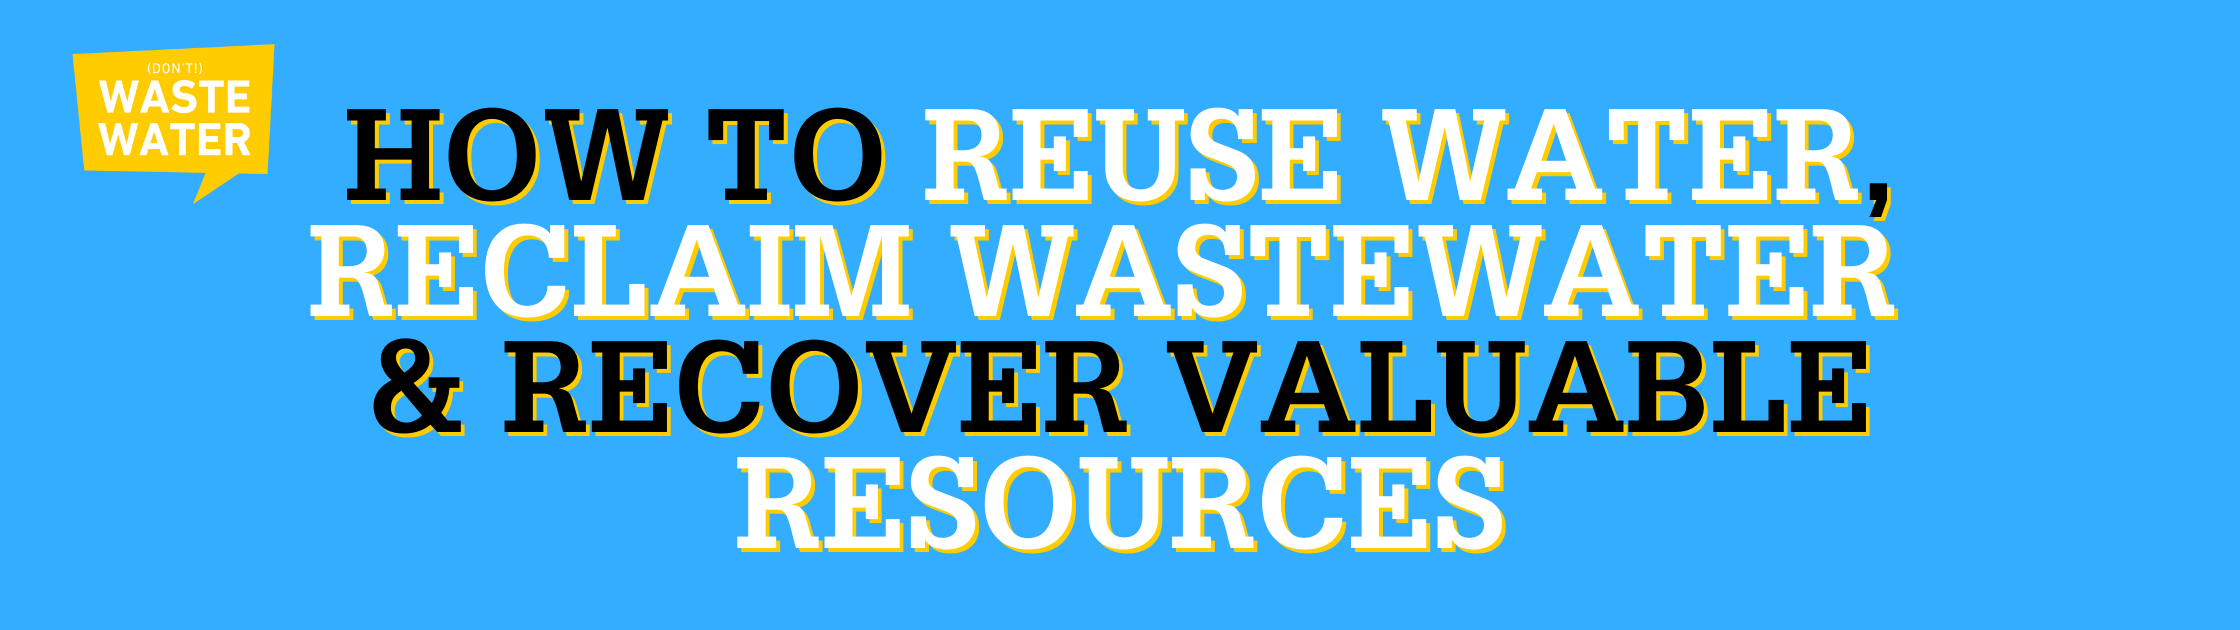 How to Reuse Water, Reclaim Wastewater & Recover Valuable Resources